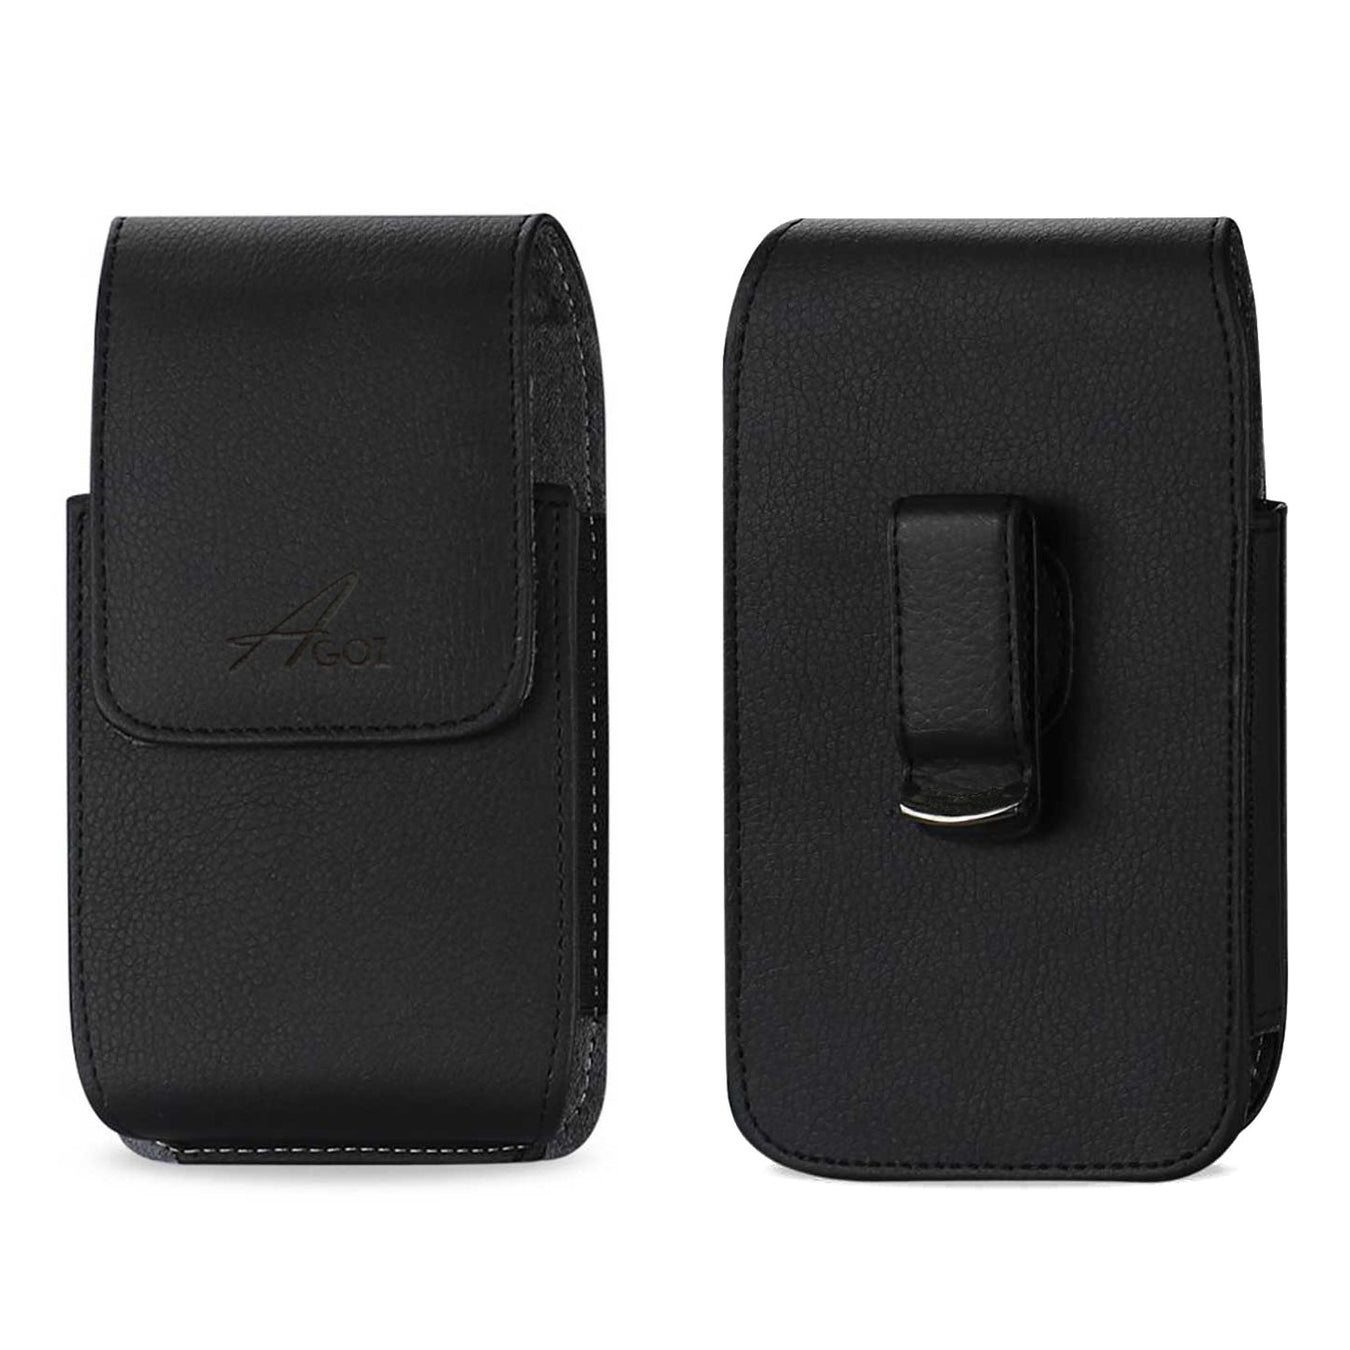 Alcatel MyFlip Leather Canvas Rugged Case Holster Pouch